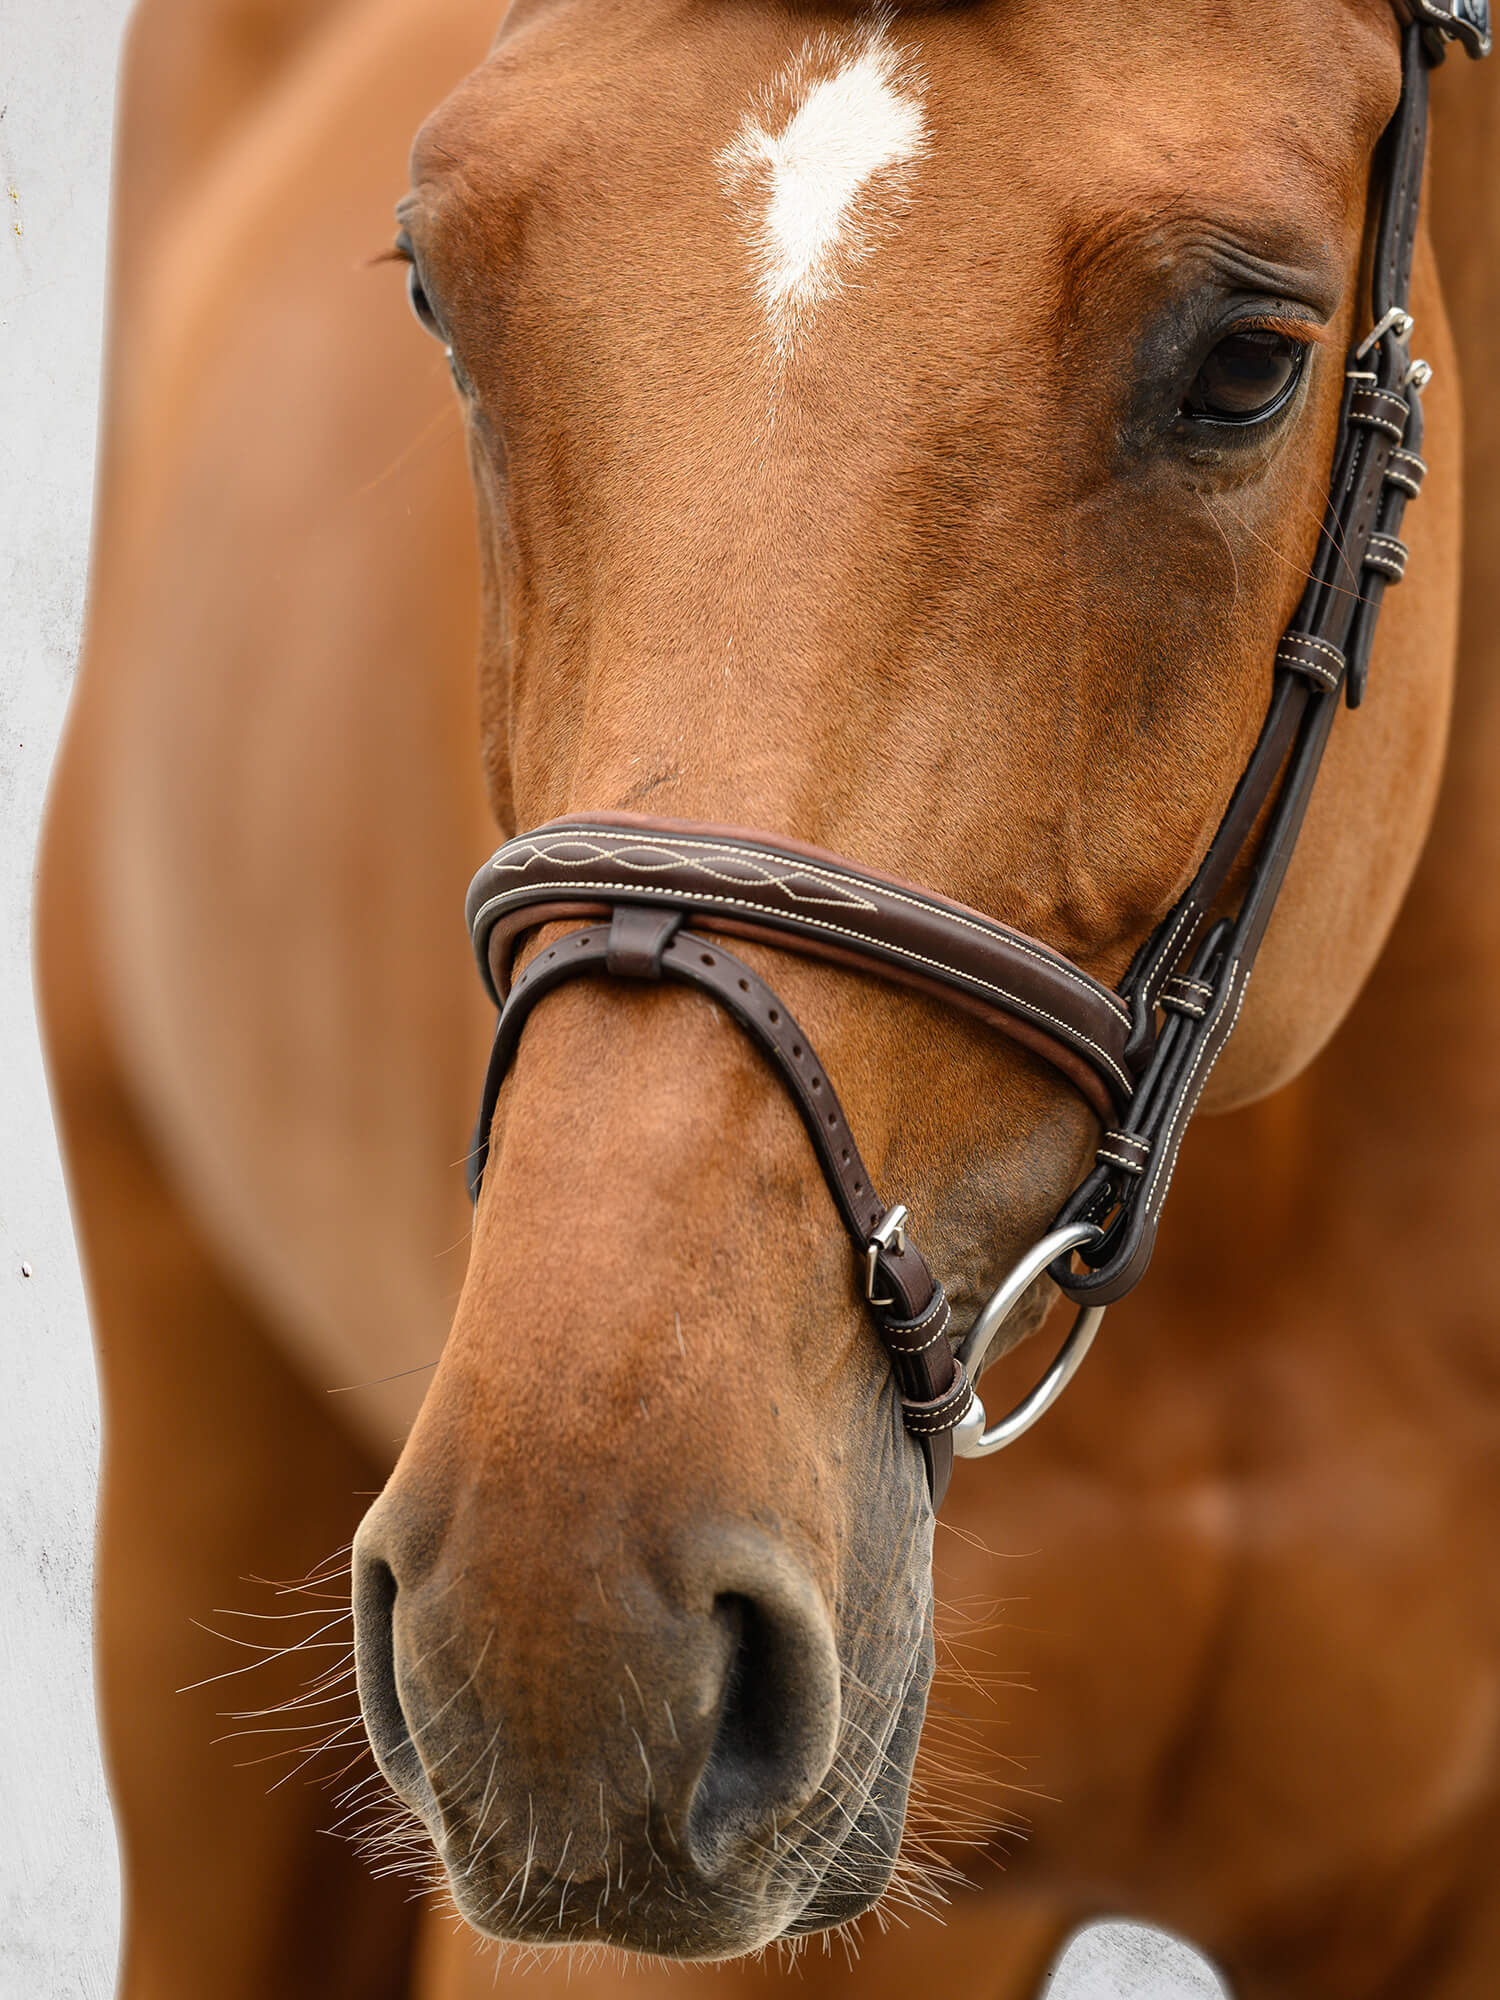 A stylish snaffle bridle with a classical look and removable flash strap (Not Magic Flash™). The noseband has a white décor stitching and a super soft pillow built-in that reduces pressure and enables a closer, optimized fit around the nose. 